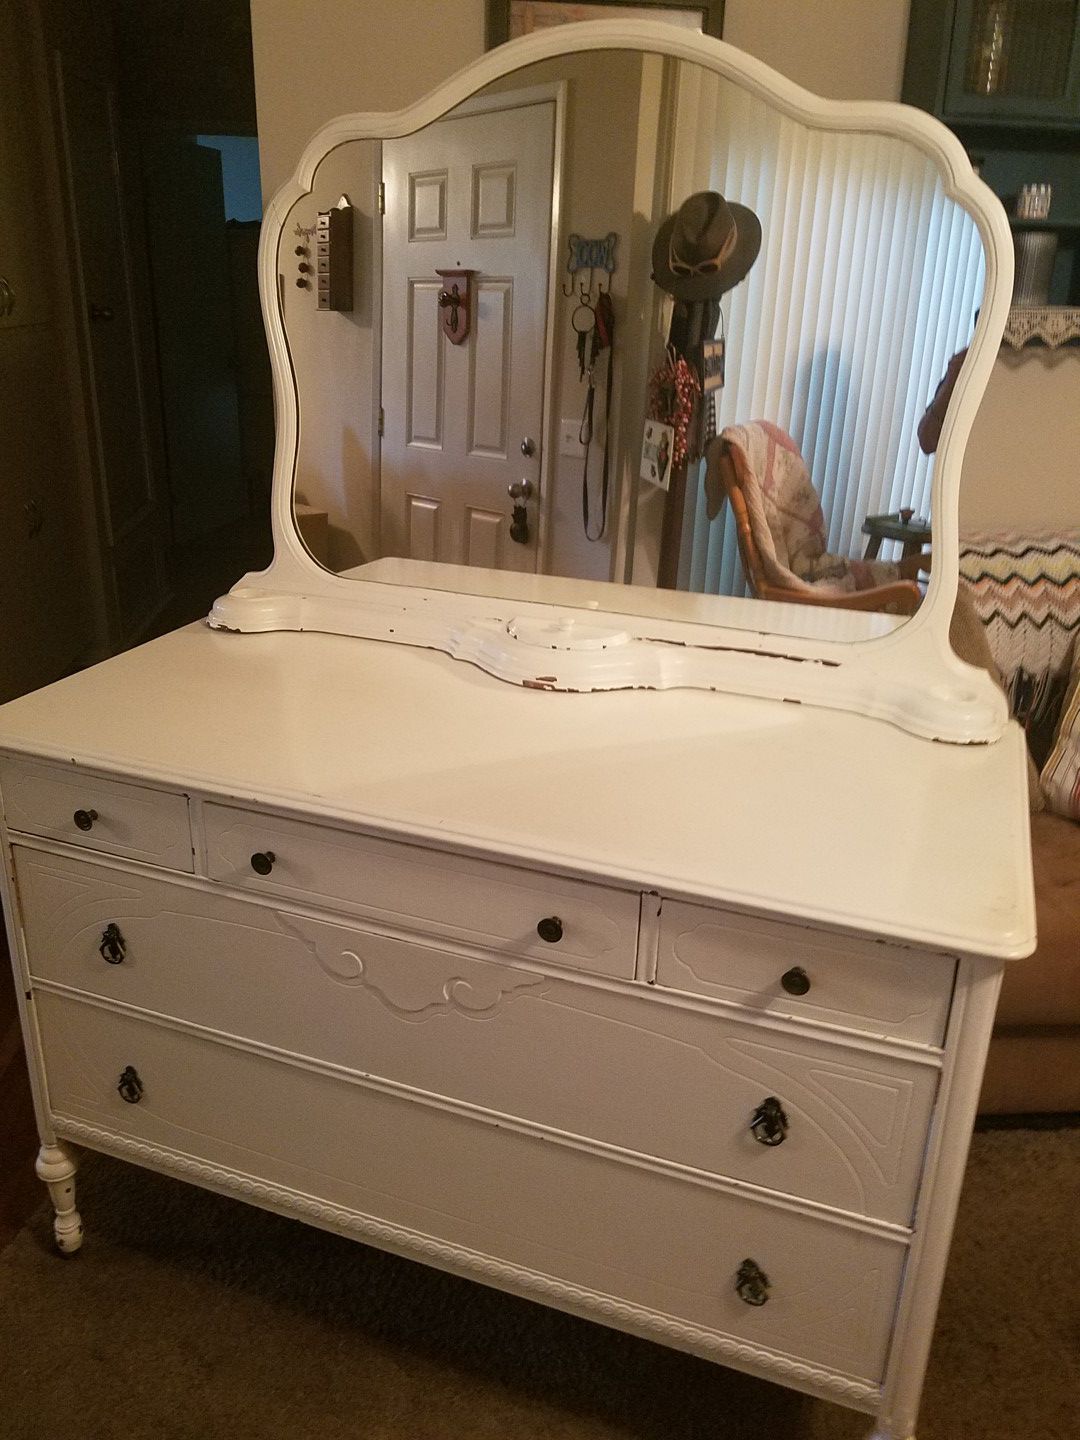 $150...A True Antique "Original 1920's" Dresser with Mirror. Dimensions listed below.